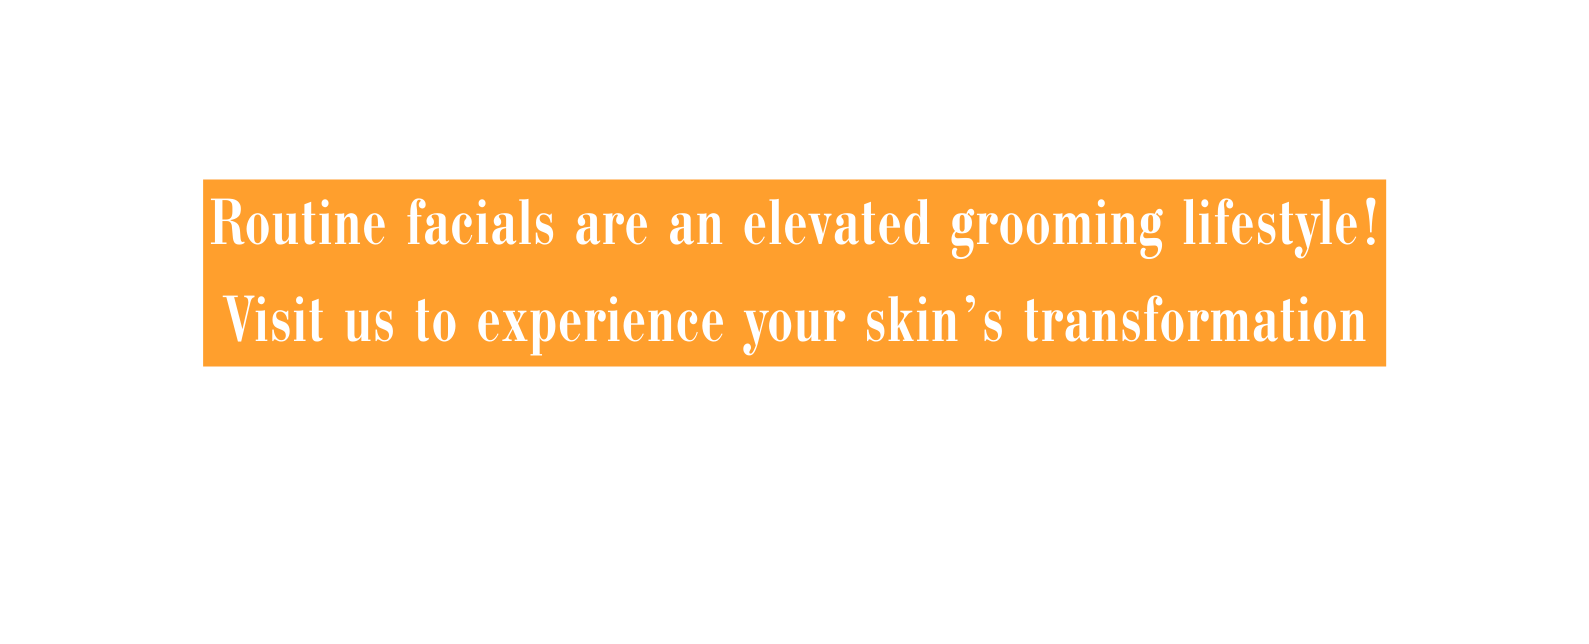 Routine facials are an elevated grooming lifestyle Visit us to experience your skin s transformation